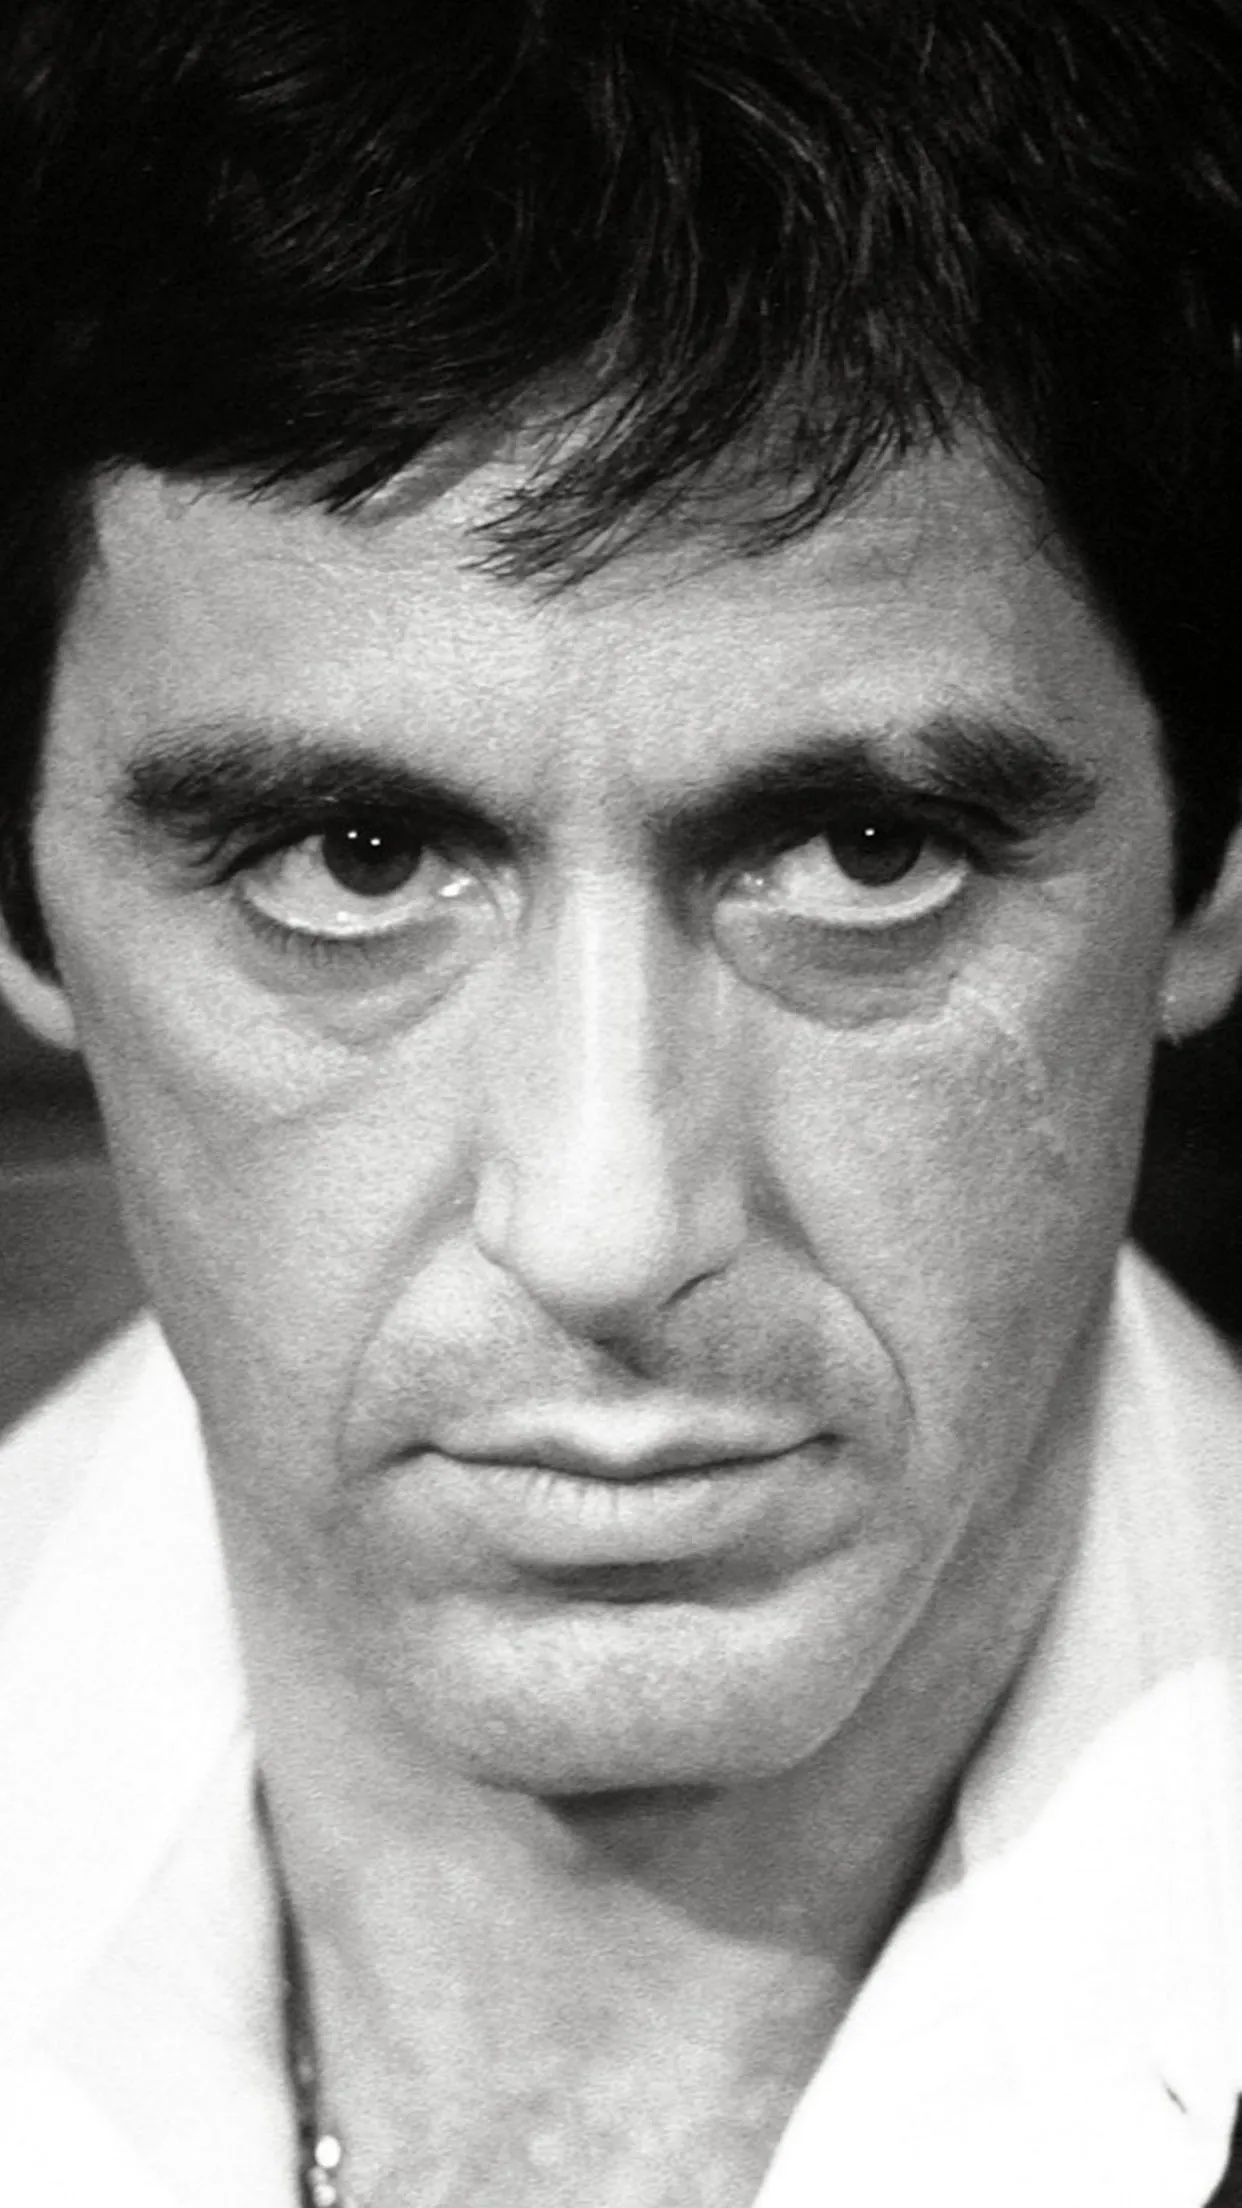 HD wallpaper, Scarface, Download, Iphone, Samsung Hd Al Pacino Wallpaper Image, Al Pacino Wallpaper, 1250X2210 Hd Phone